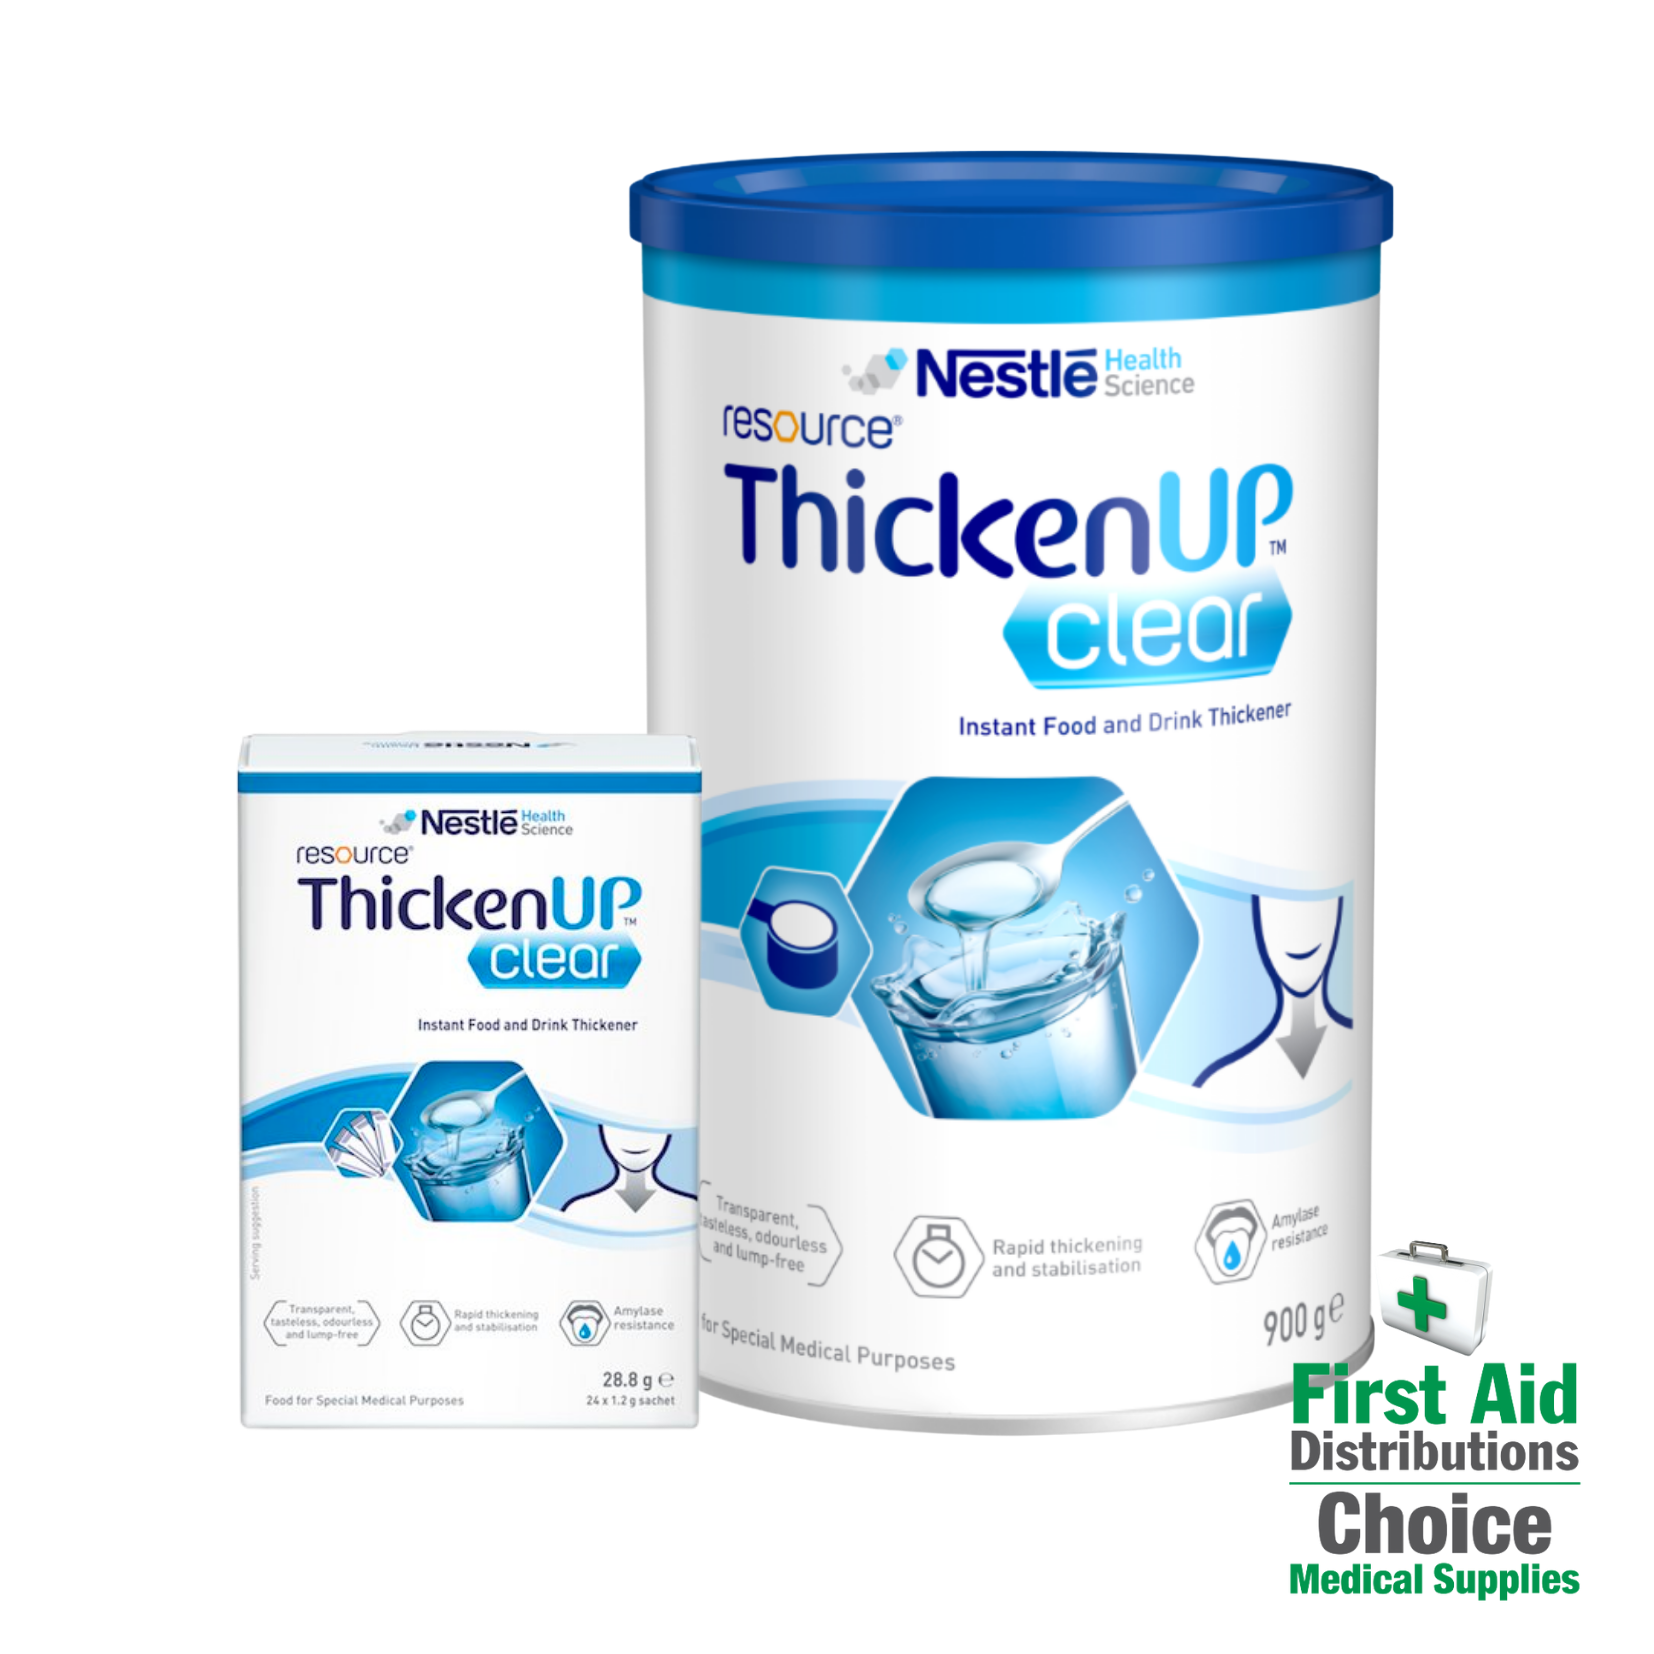 collections/Resource_Thicken_Up_Powder_Both_First_Aid_Distributions.png